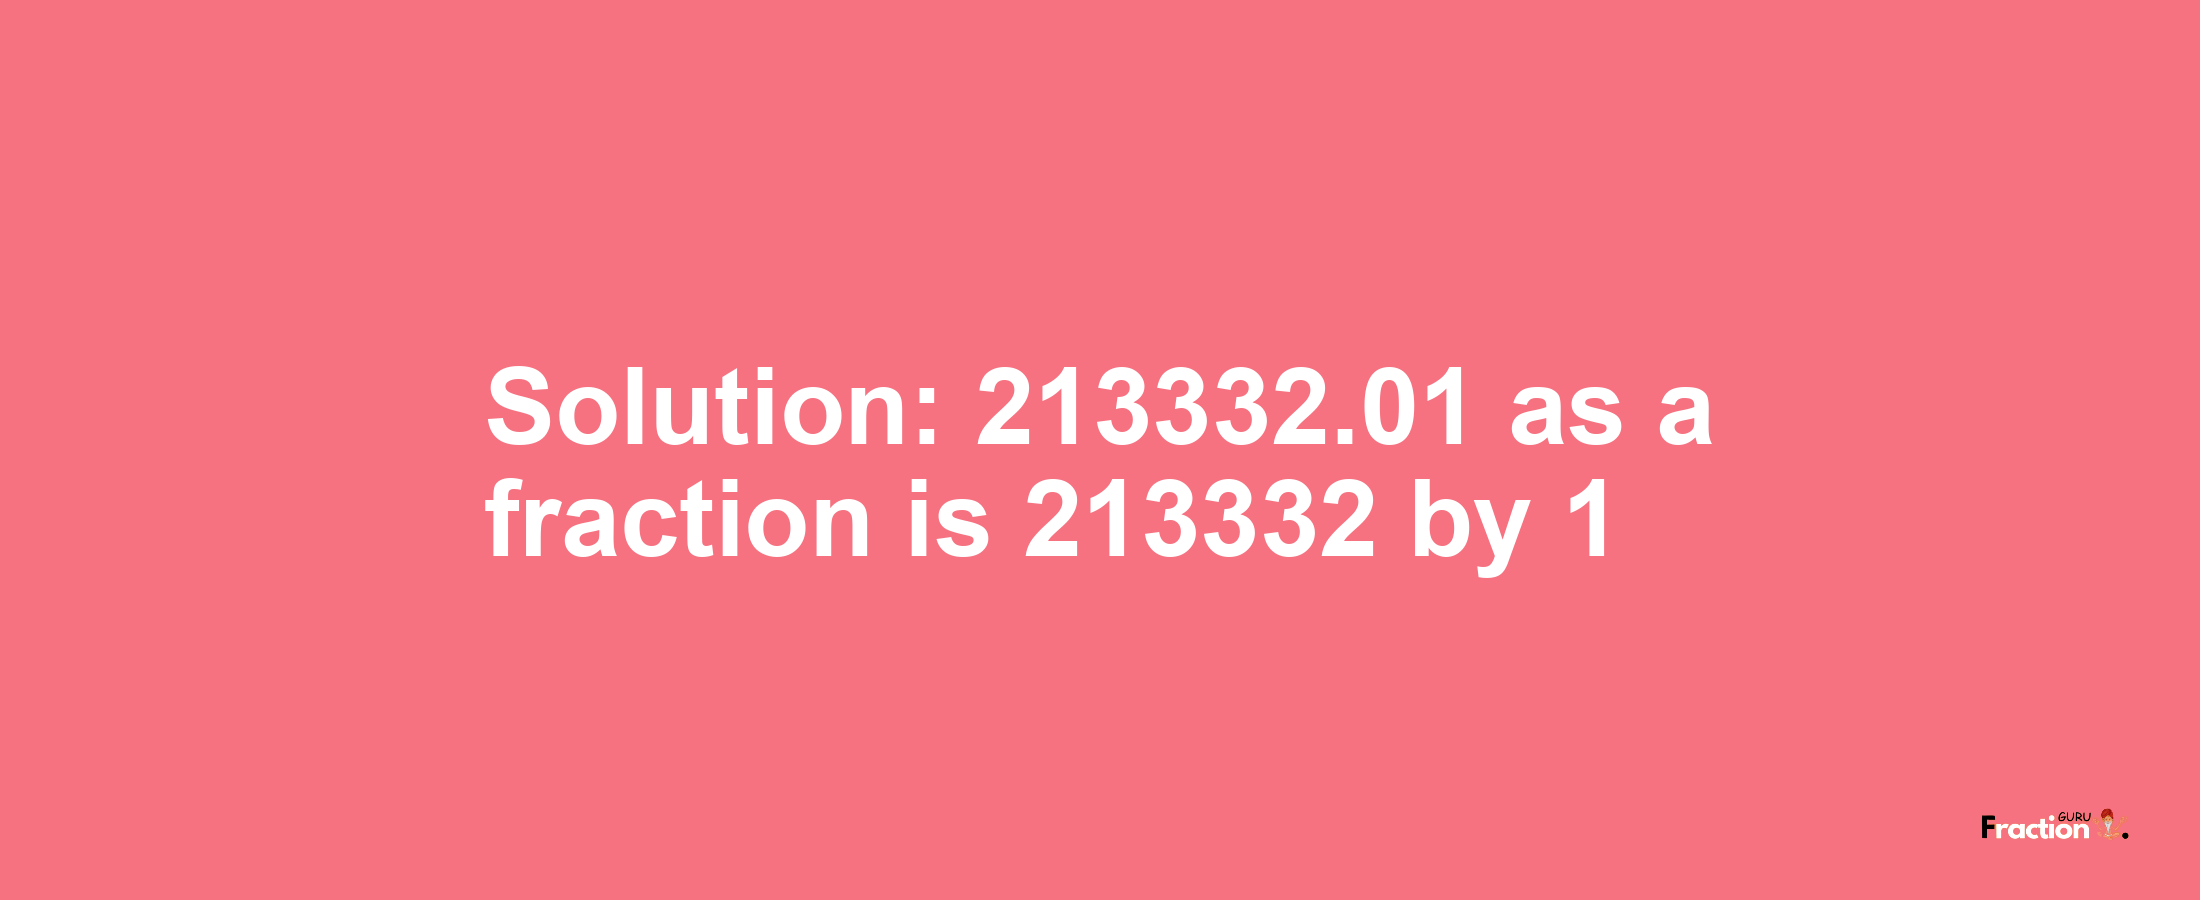 Solution:213332.01 as a fraction is 213332/1